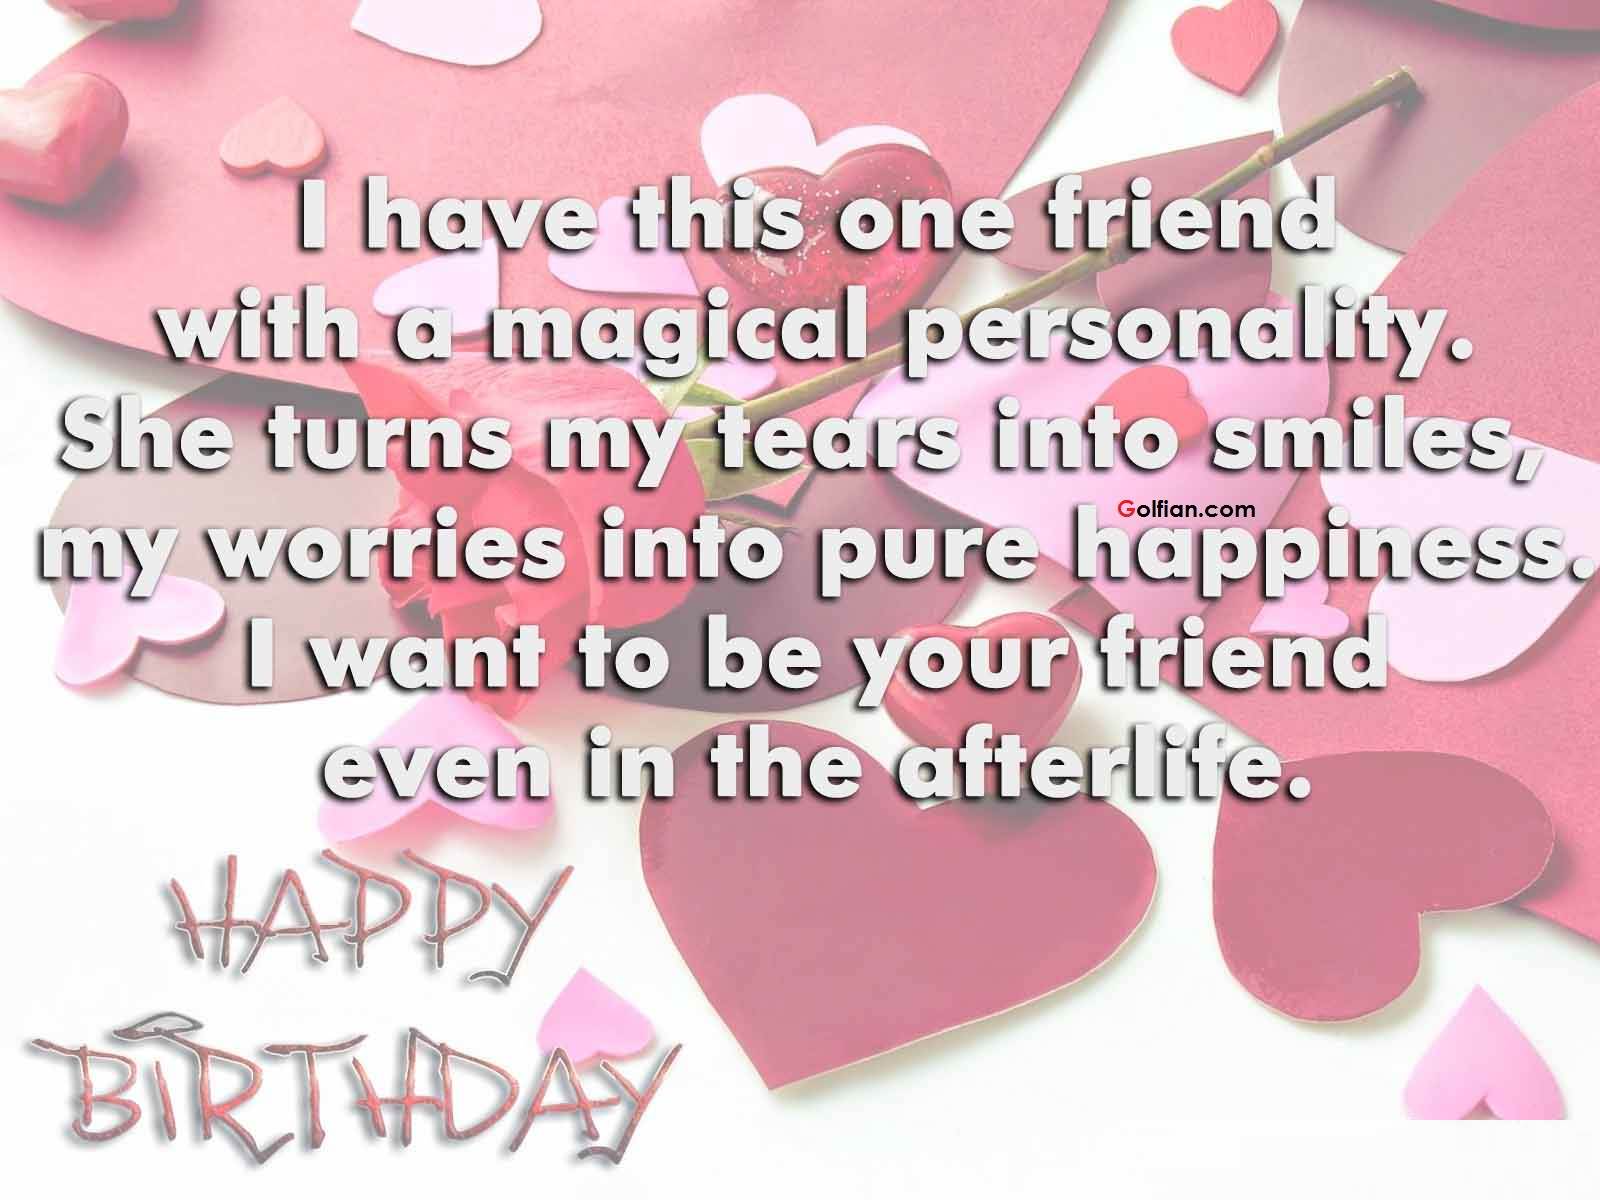 Happy birthday love quotes for friends 6965319